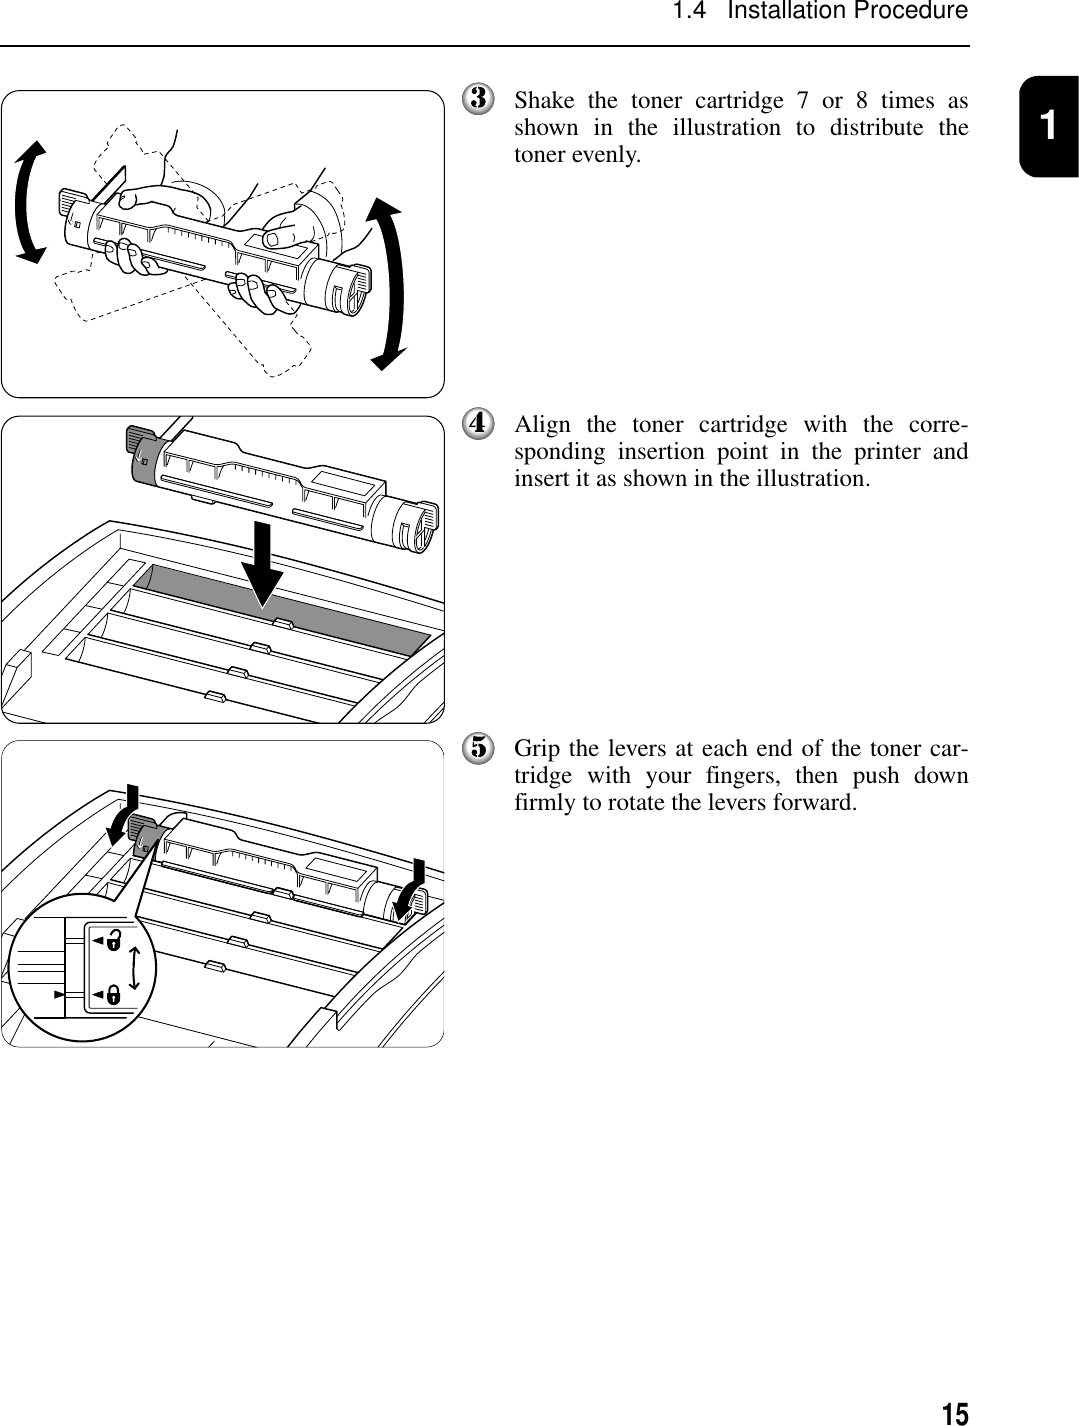 1511.4   Installation ProcedureShake the toner cartridge 7 or 8 times asshown in the illustration to distribute thetoner evenly.Align the toner cartridge with the corre-sponding insertion point in the printer andinsert it as shown in the illustration.Grip the levers at each end of the toner car-tridge with your fingers, then push downfirmly to rotate the levers forward.